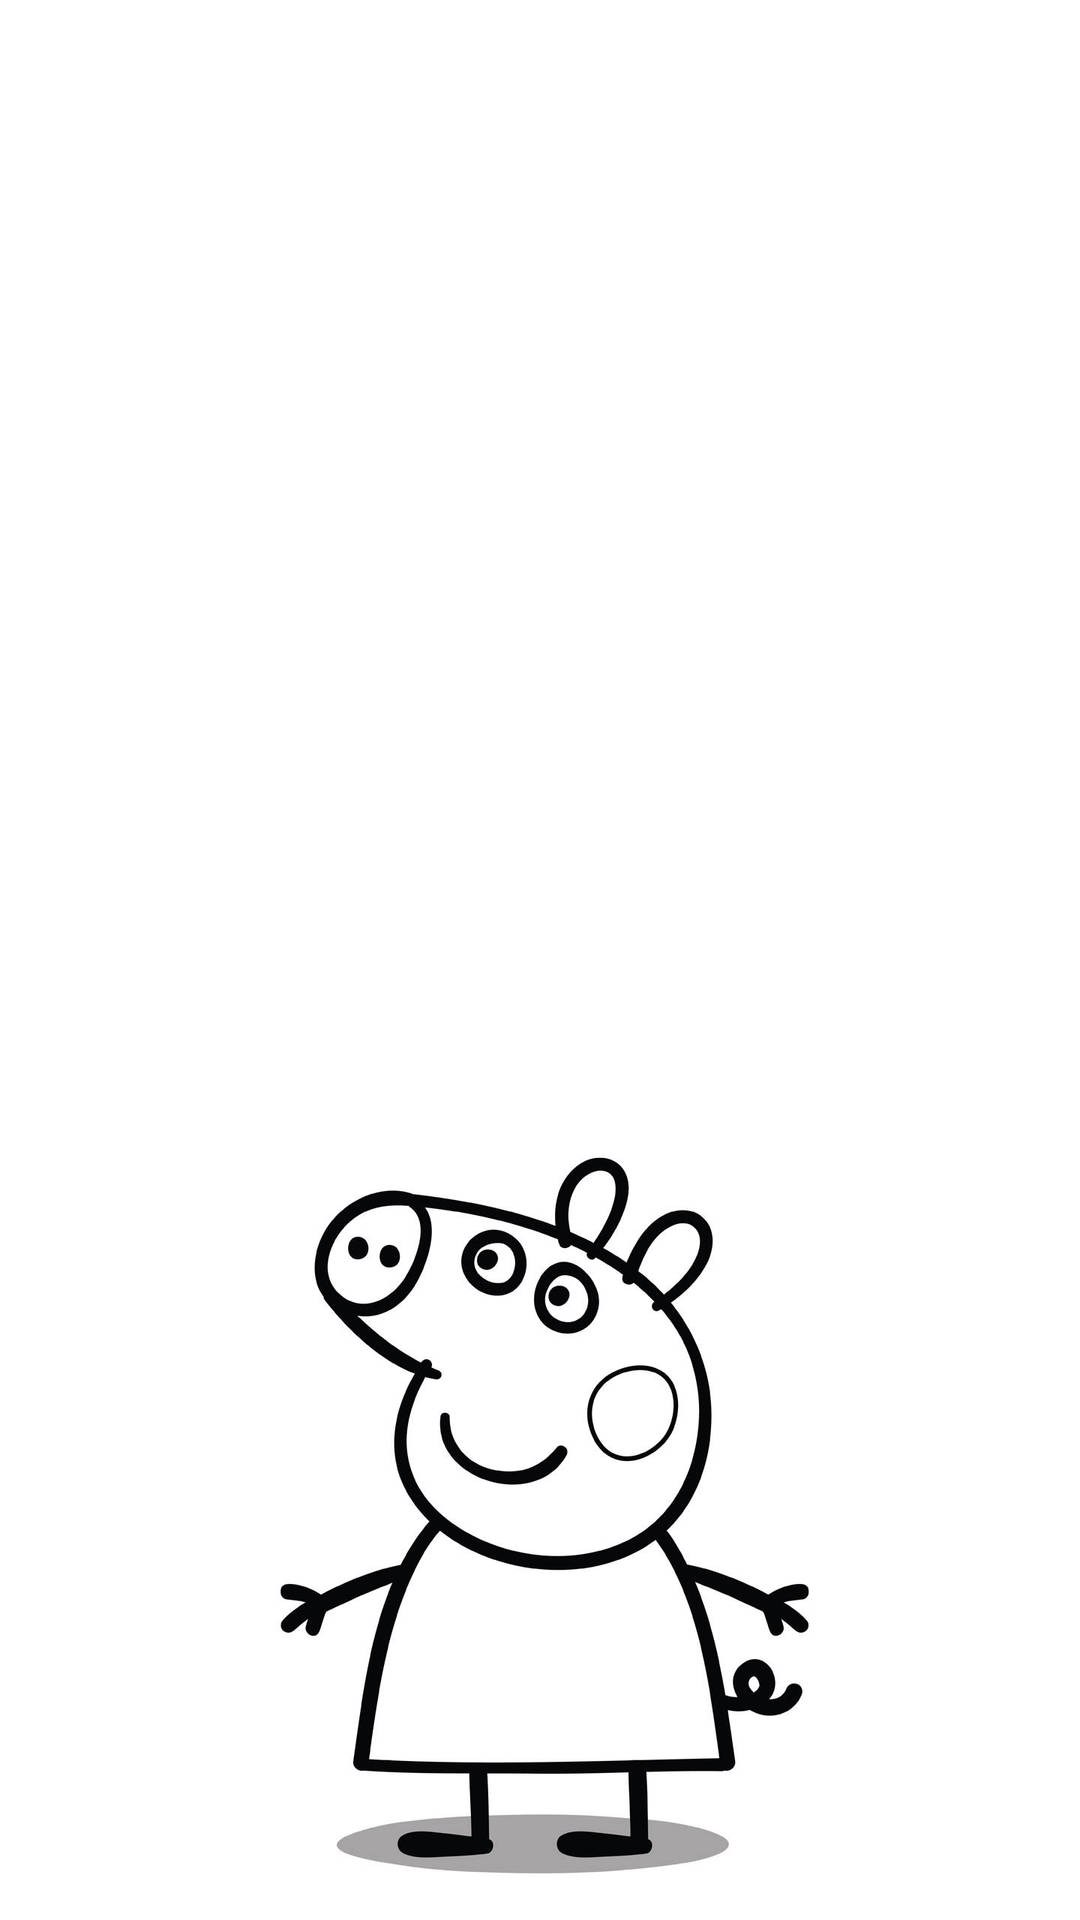 Peppa Pig Iphone Outline Sketch Background